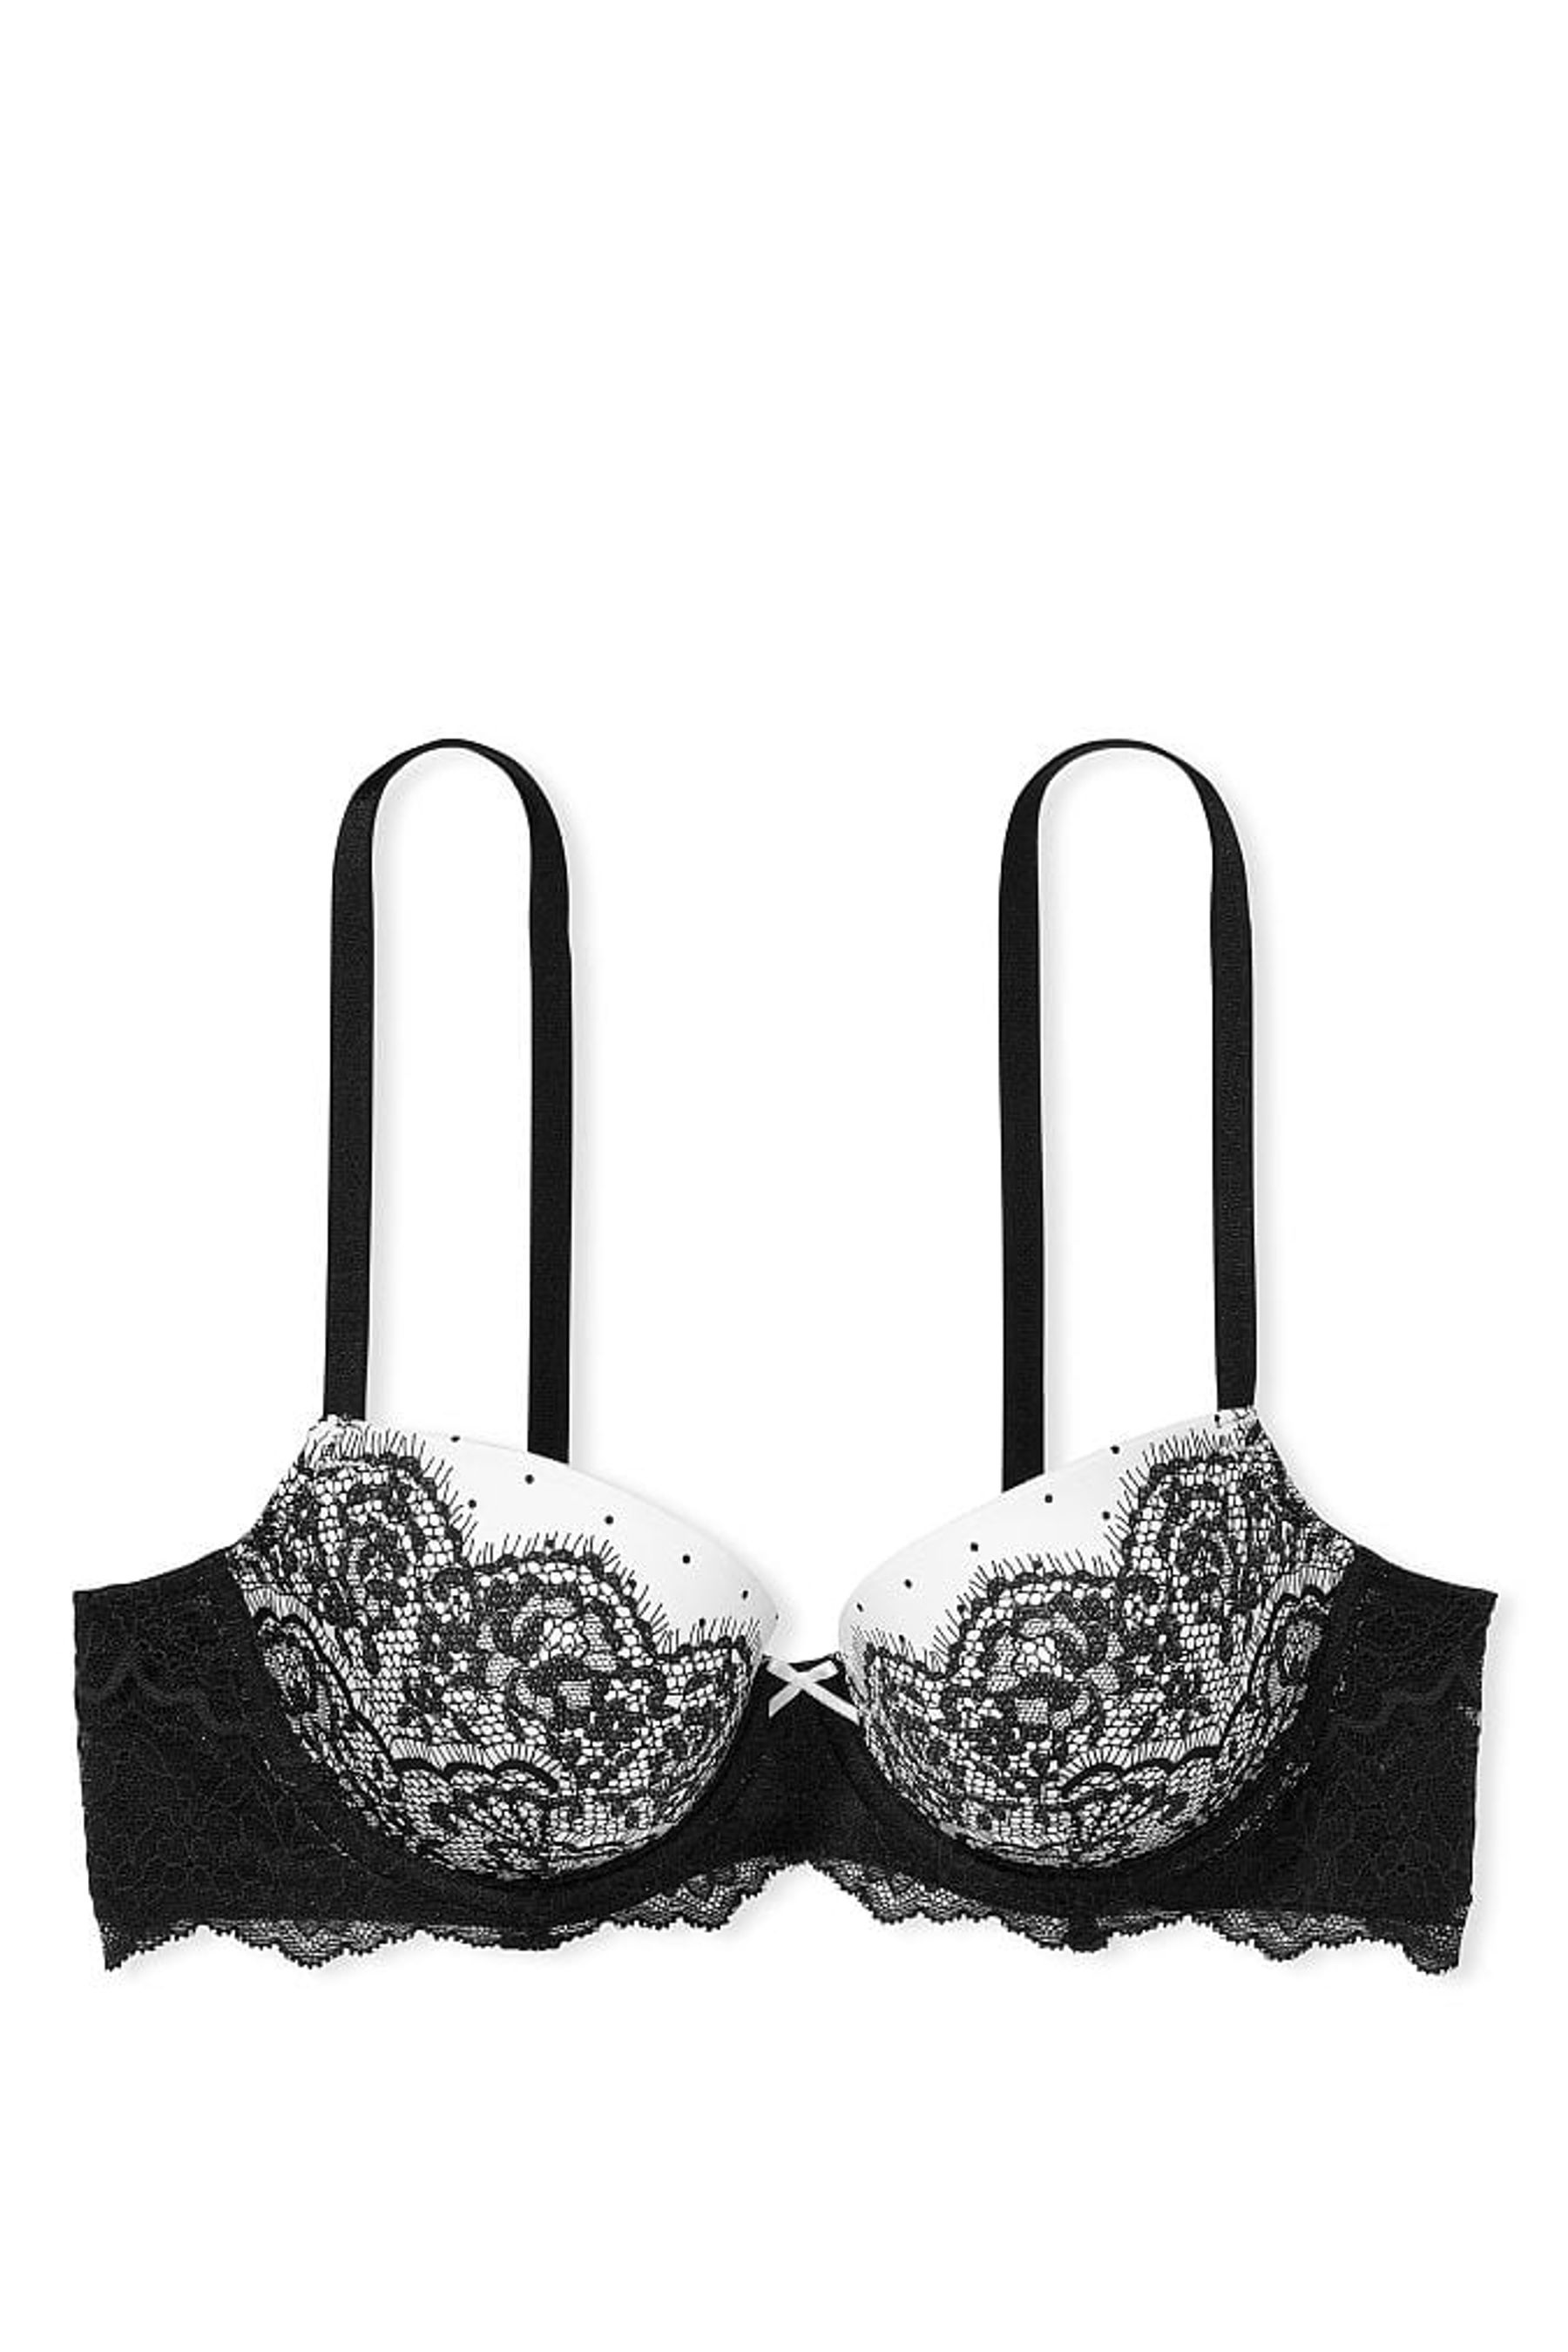 Buy Victoria's Secret Smooth Lace Wing Lightly Lined Demi Bra from the ...